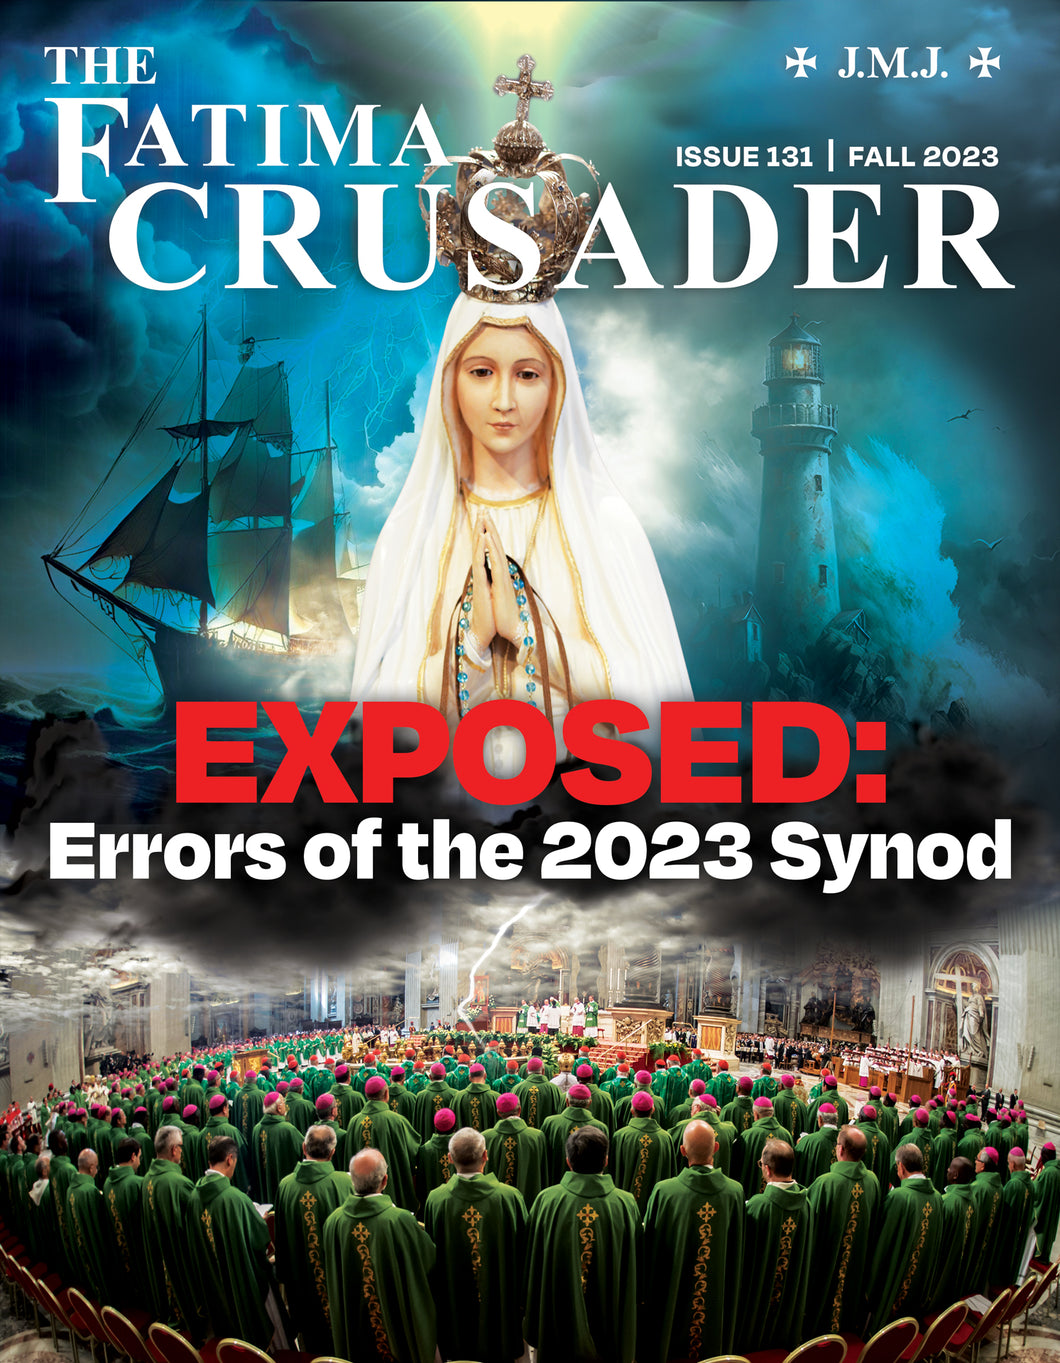 The Fatima Crusader, Issue 131 (Fall 2023) – print version